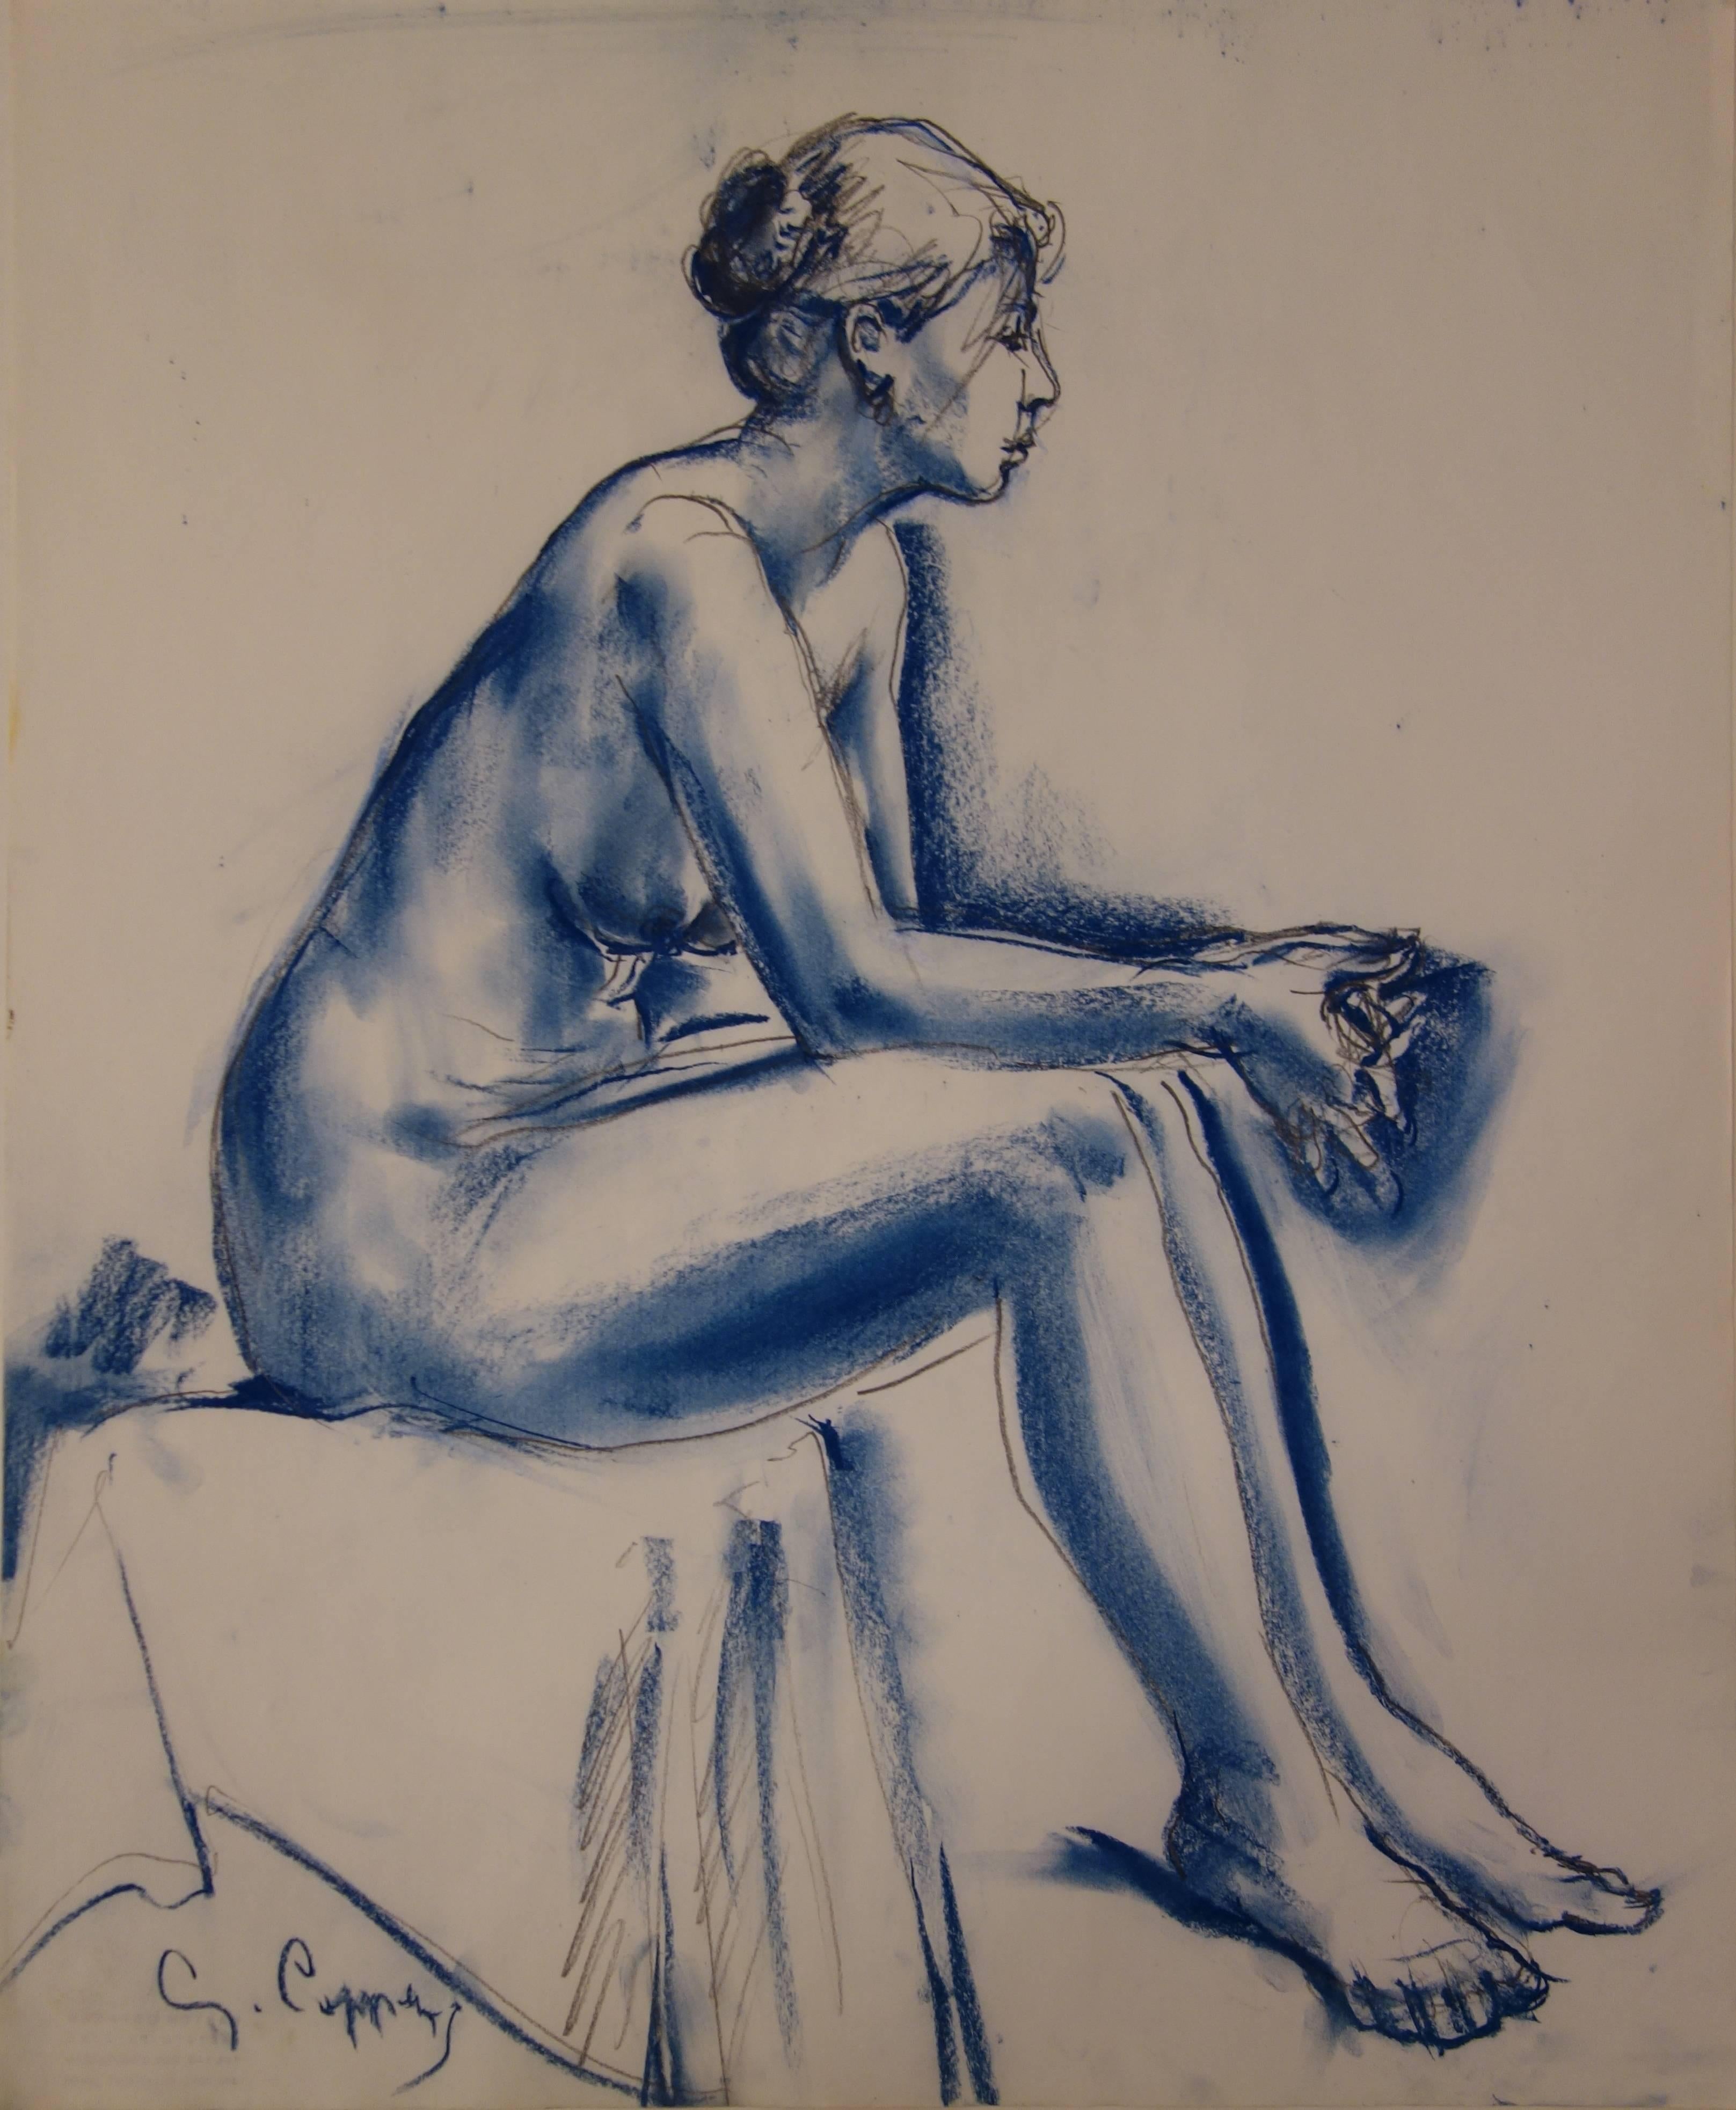 Blue Nude Ballerina - Original signed charcoals drawing - Art by Gaston Coppens